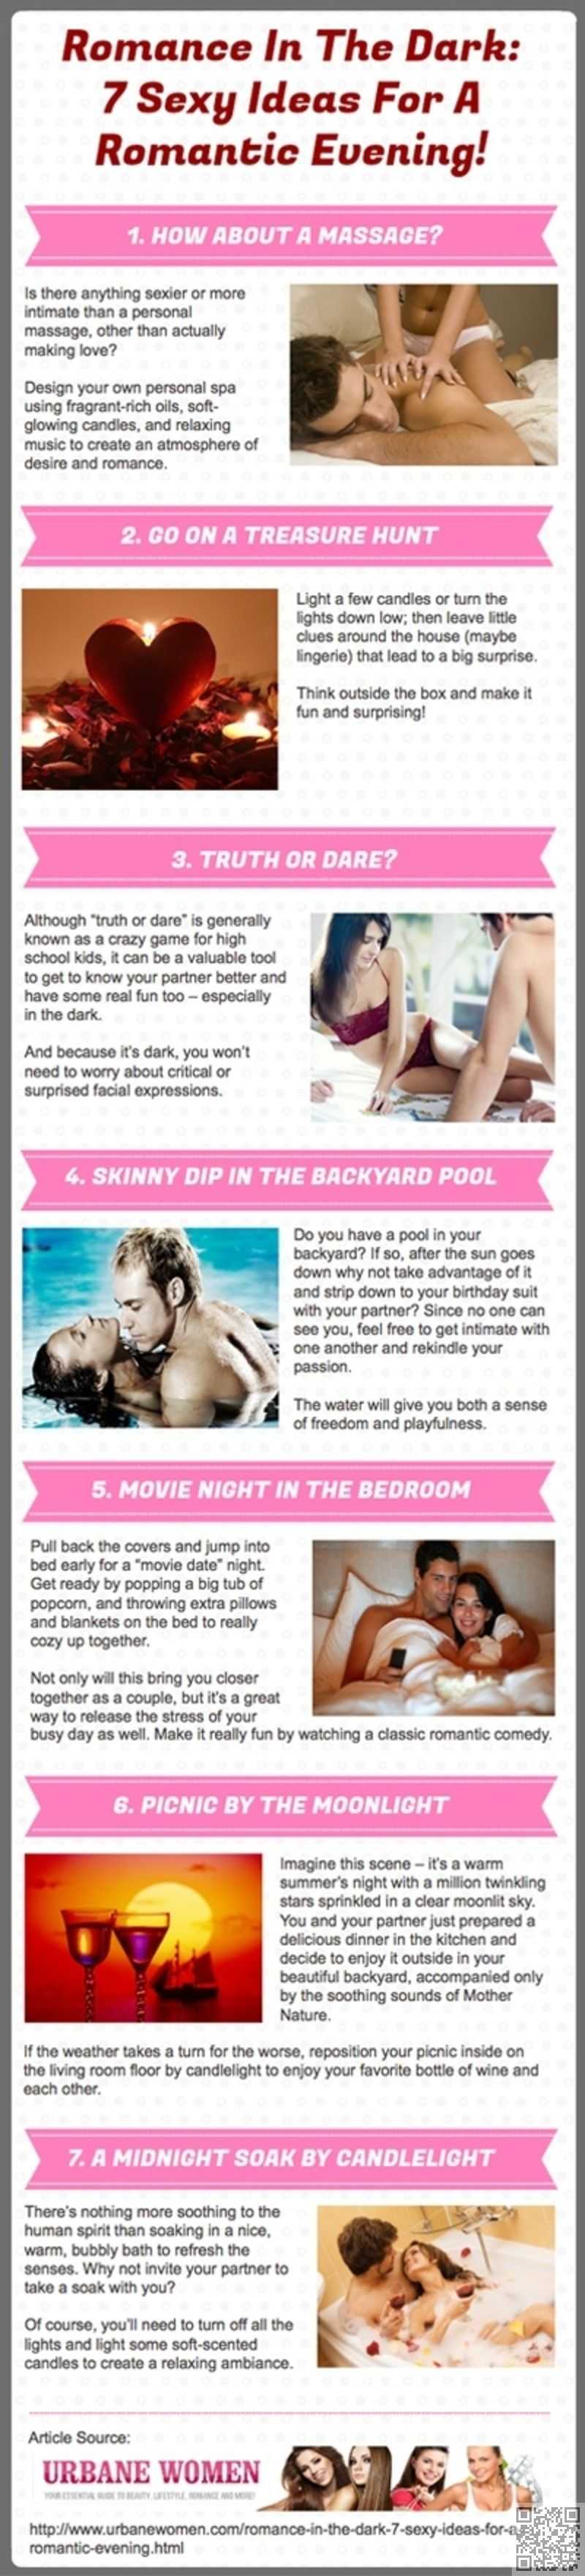 7 Sexy Ideas For A Romantic Evening